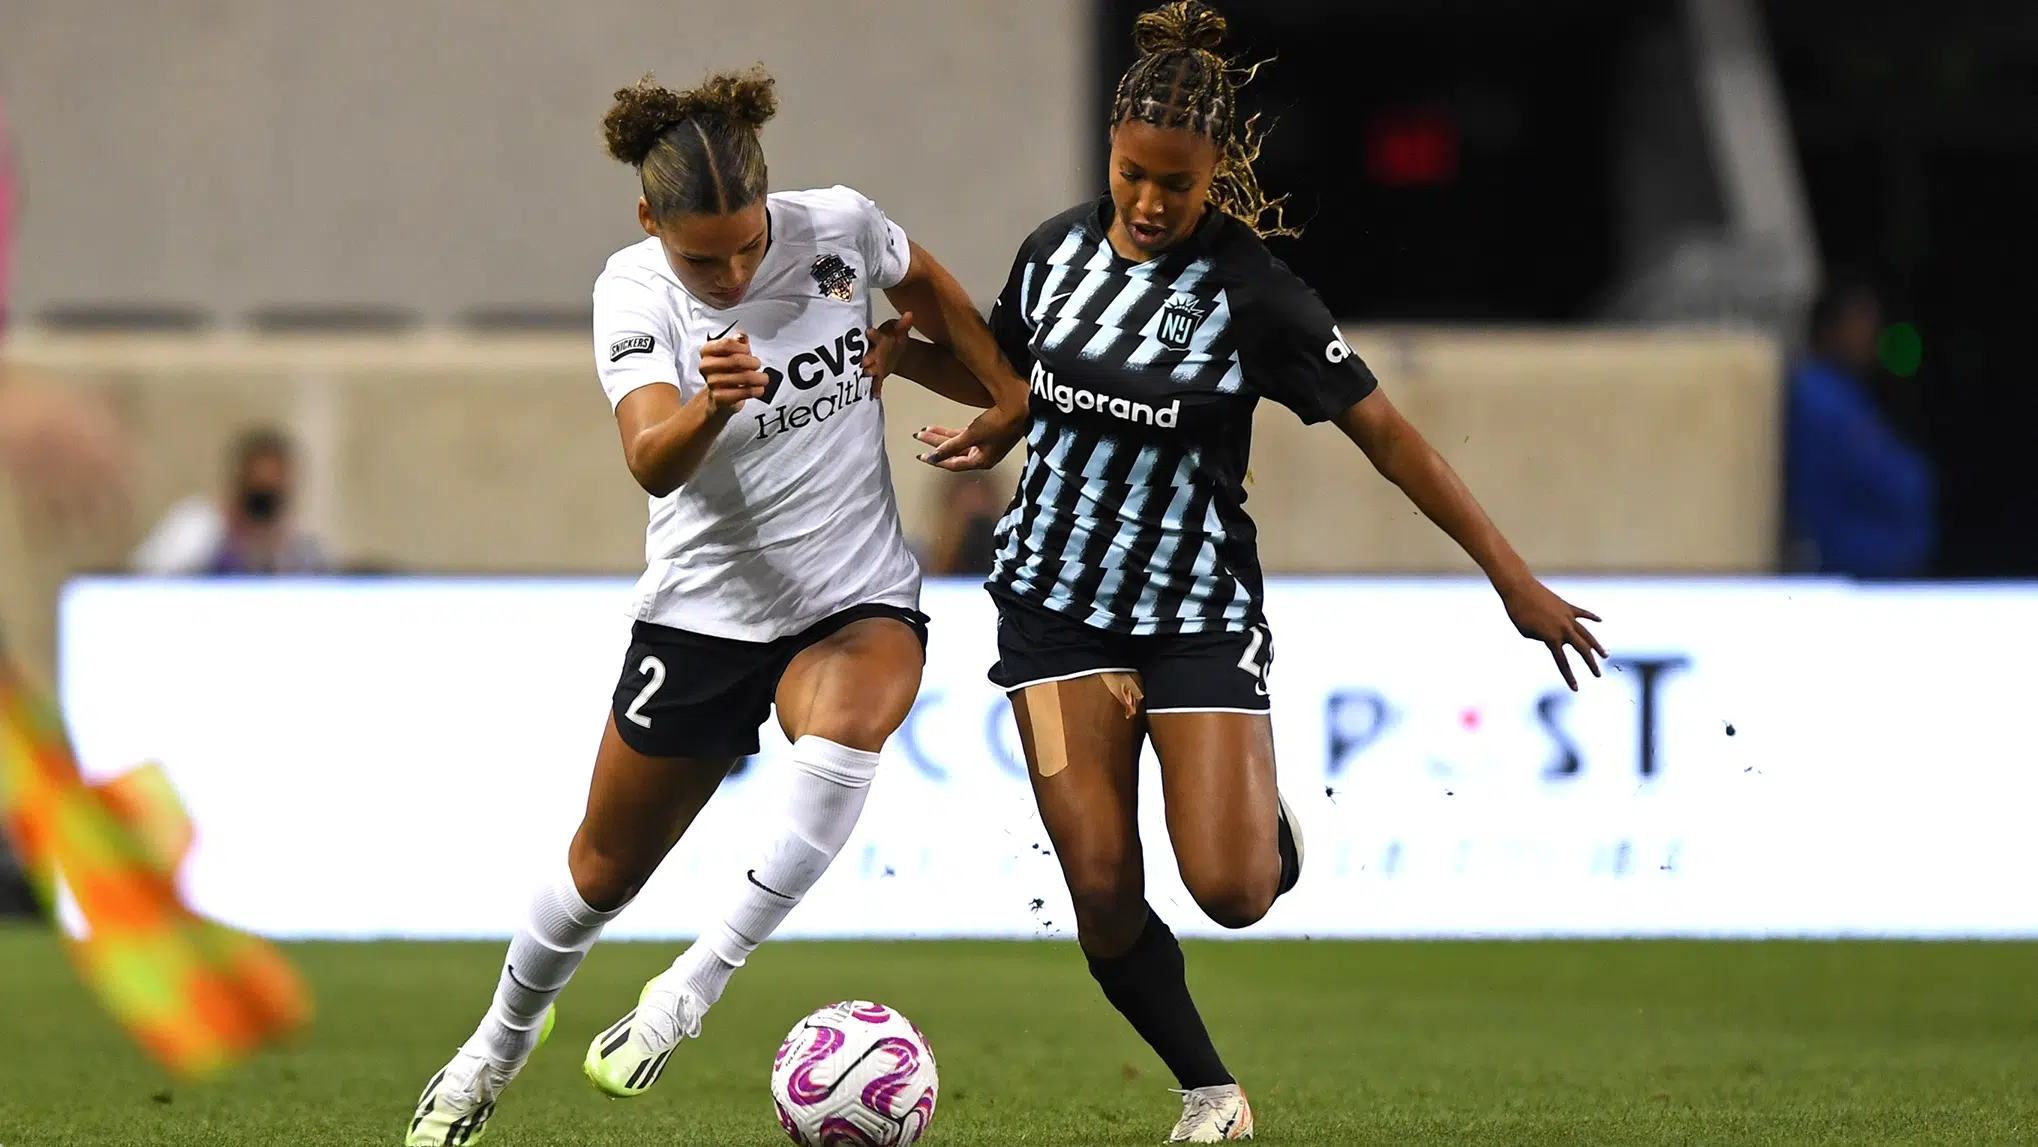 Trinity Rodman in a white jersey with black shorts battles Midge Purce in a black jersey and shorts for possession of the soccer ball.